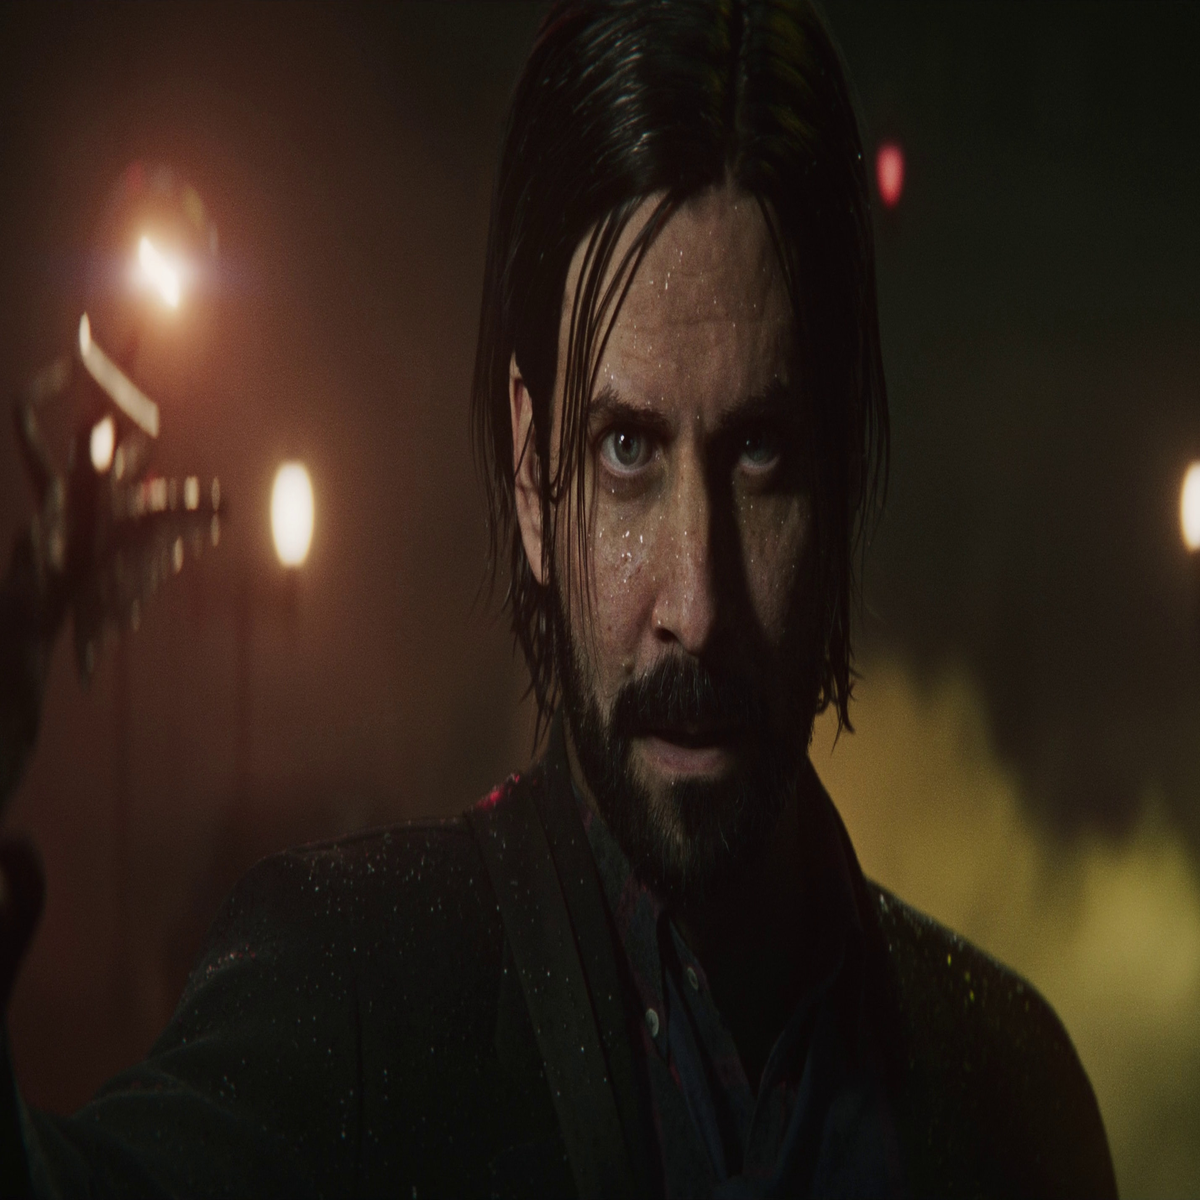 Alan Wake 2 Actor Says To Expect An October Release Date